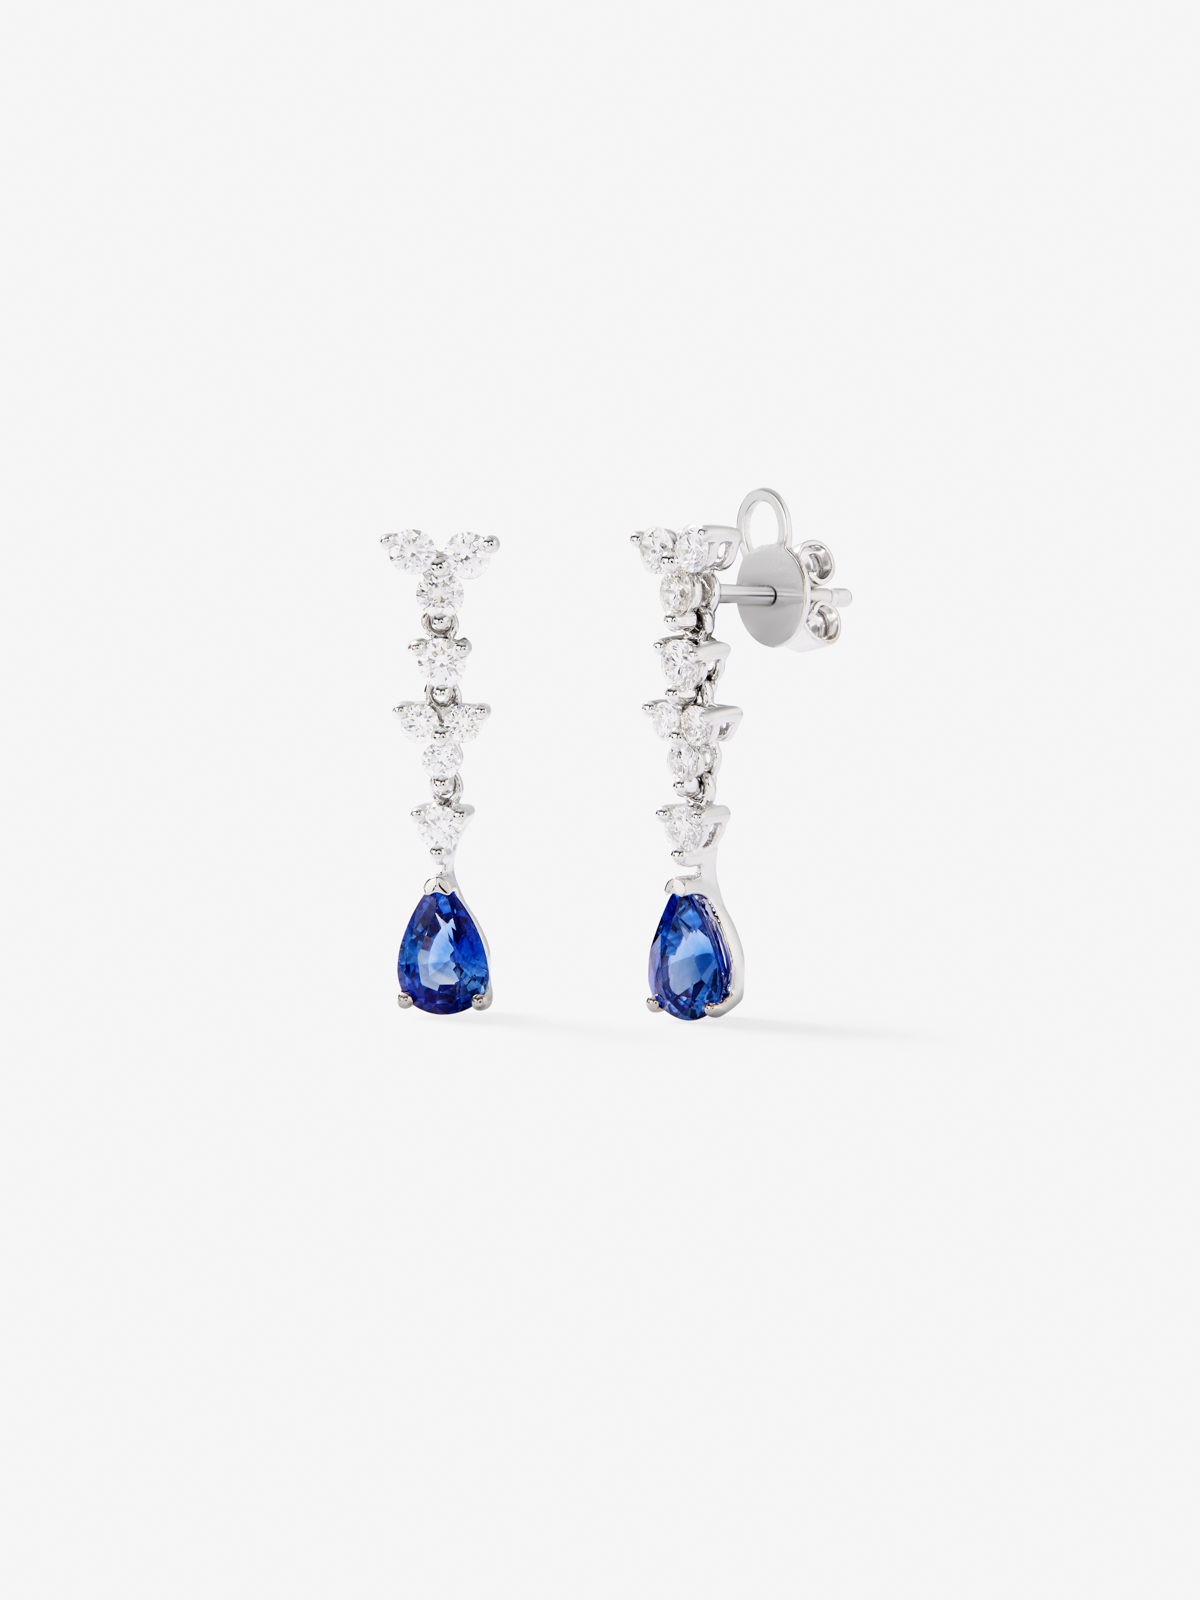 18K white gold earrings with blue sapps in 1.68 cts and white diamonds in bright size of 0.76 cts